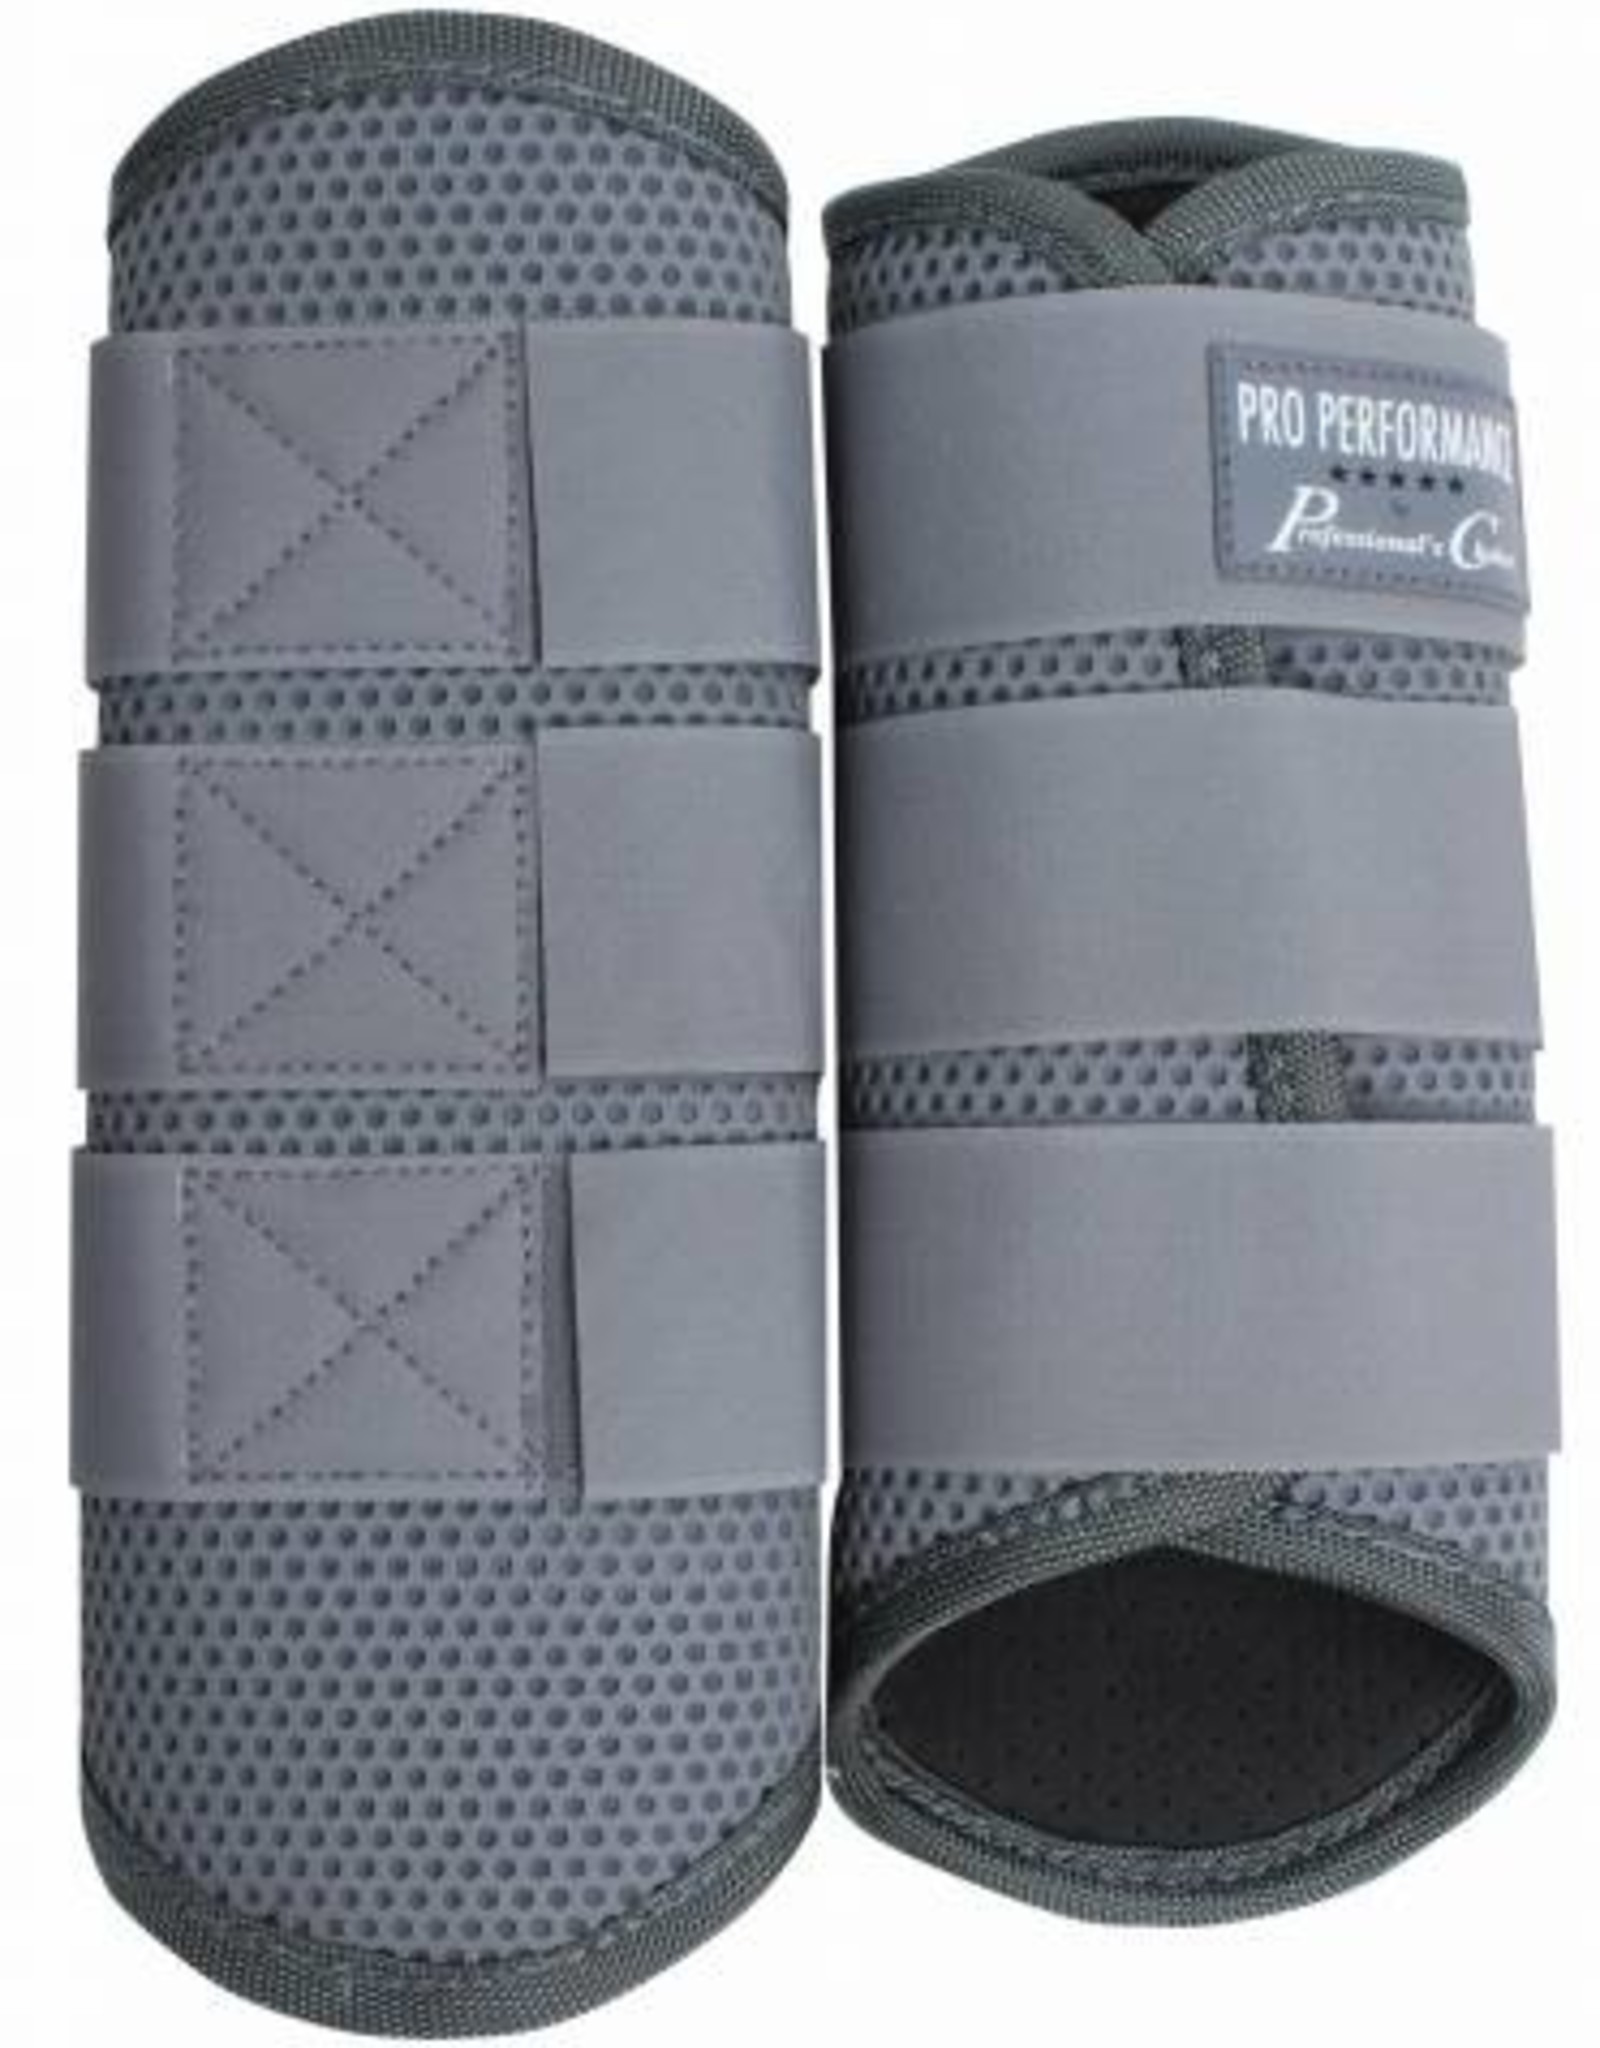 PROFESSIONAL'S CHOICE PRO PERFORMANCE XC REAR BOOT